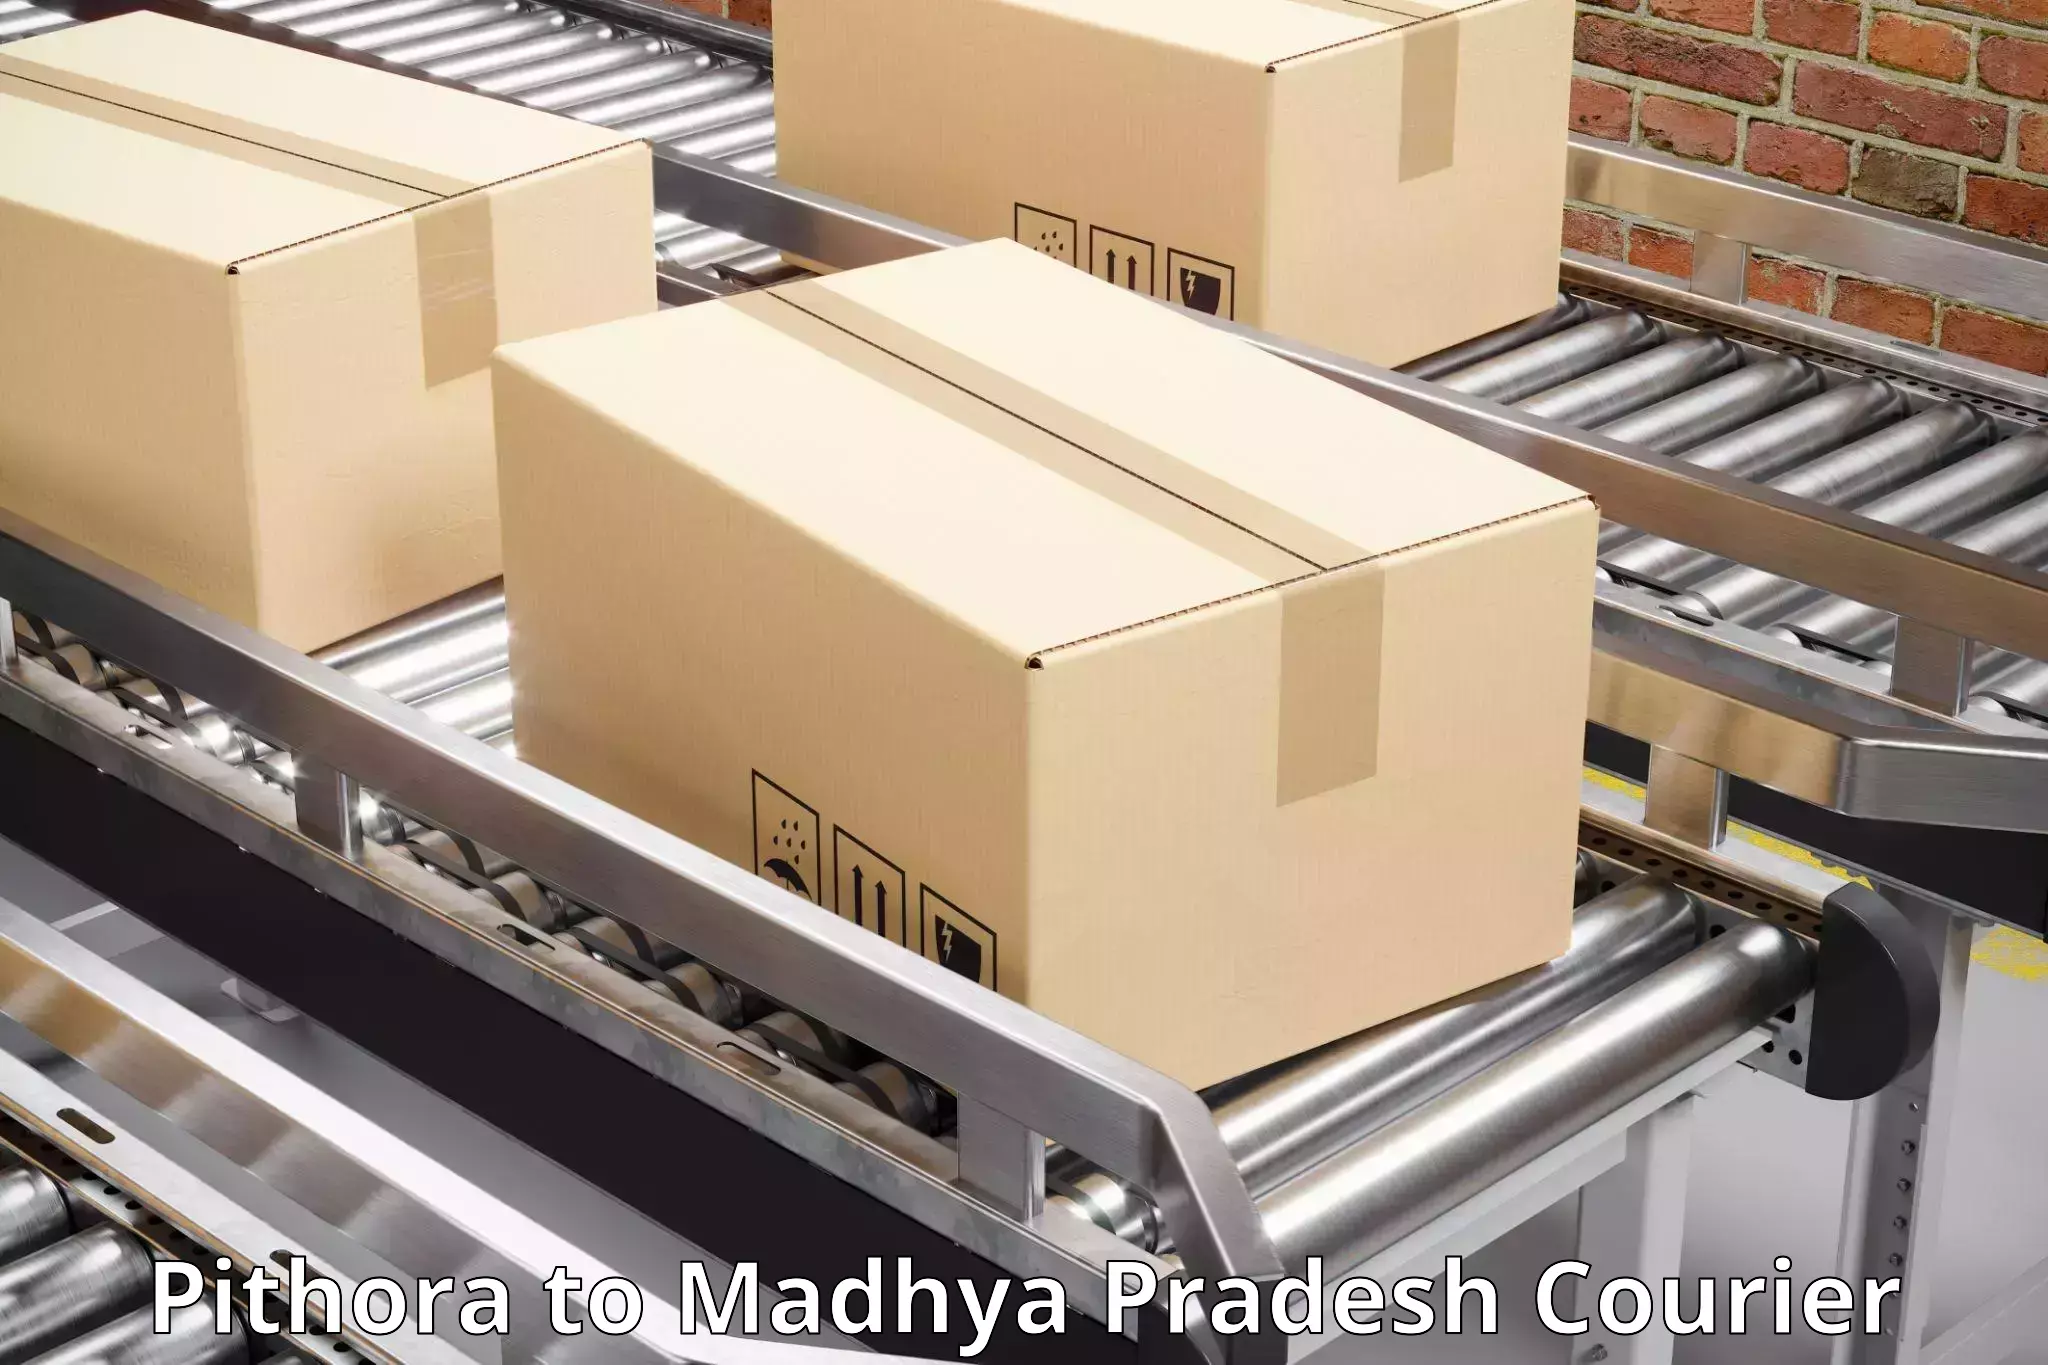 Quality courier services Pithora to Ratlam